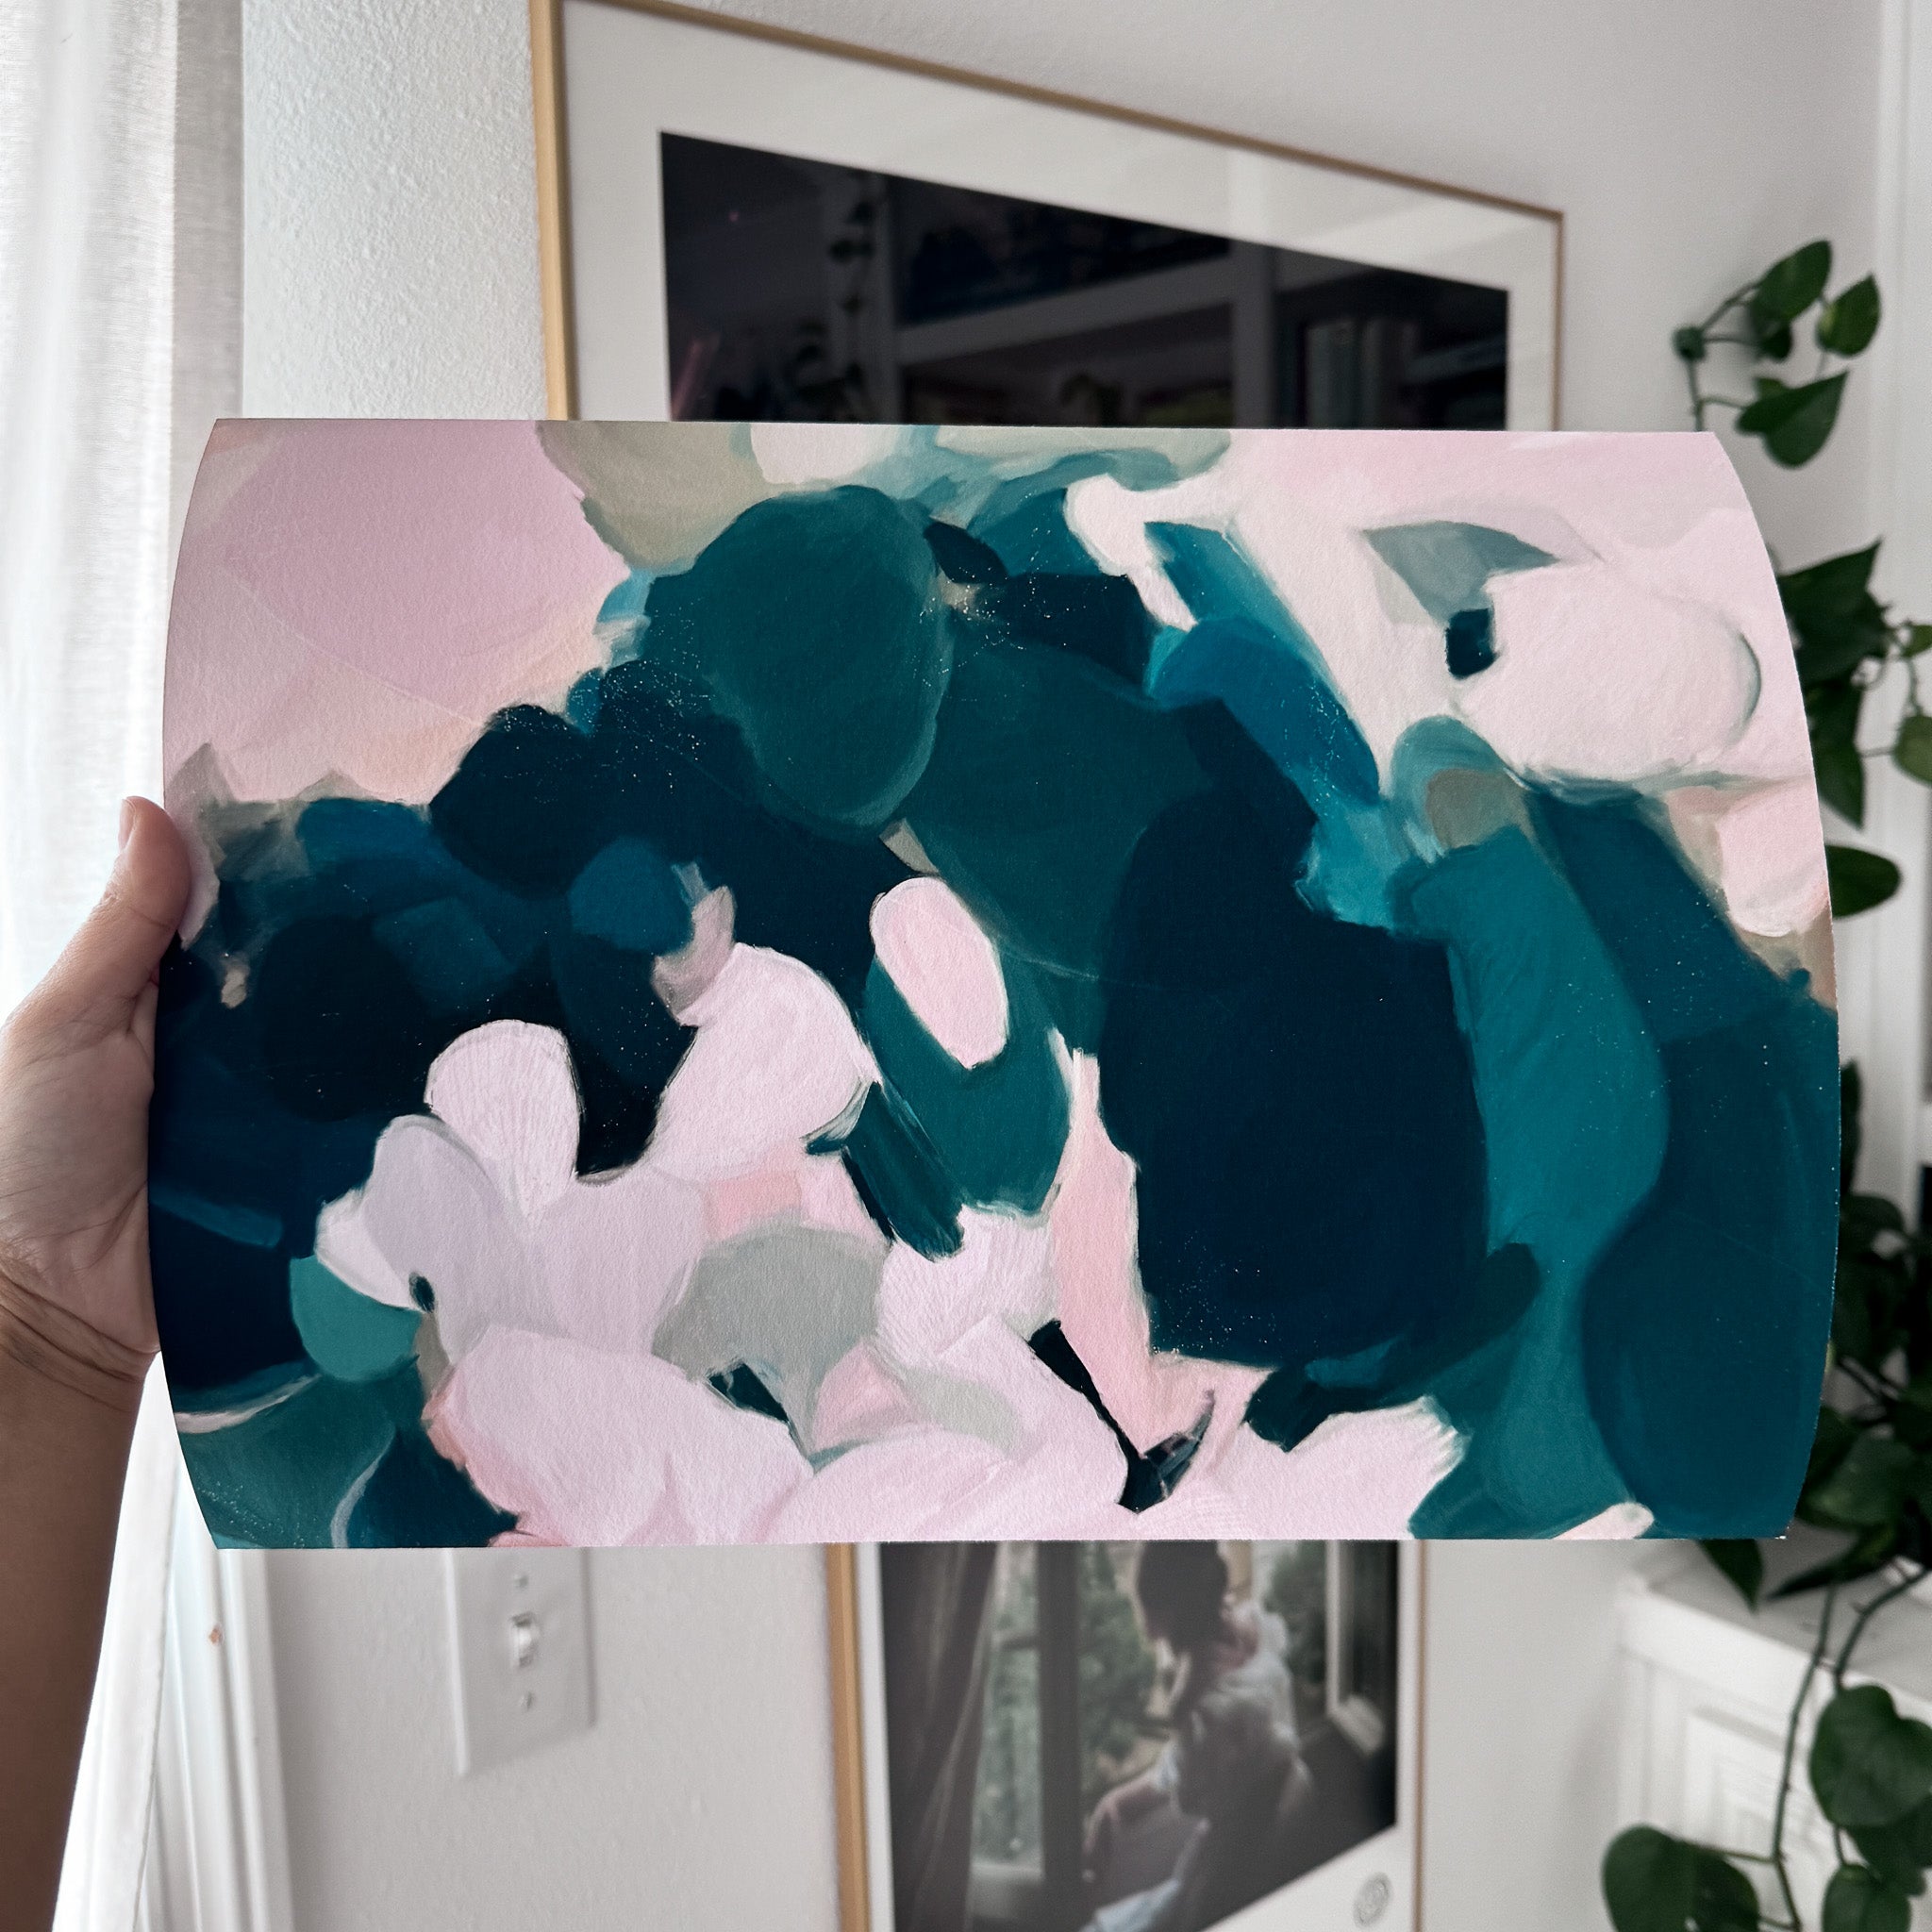 Aerwyn, colorful abstract wall art prints by Parima Studio